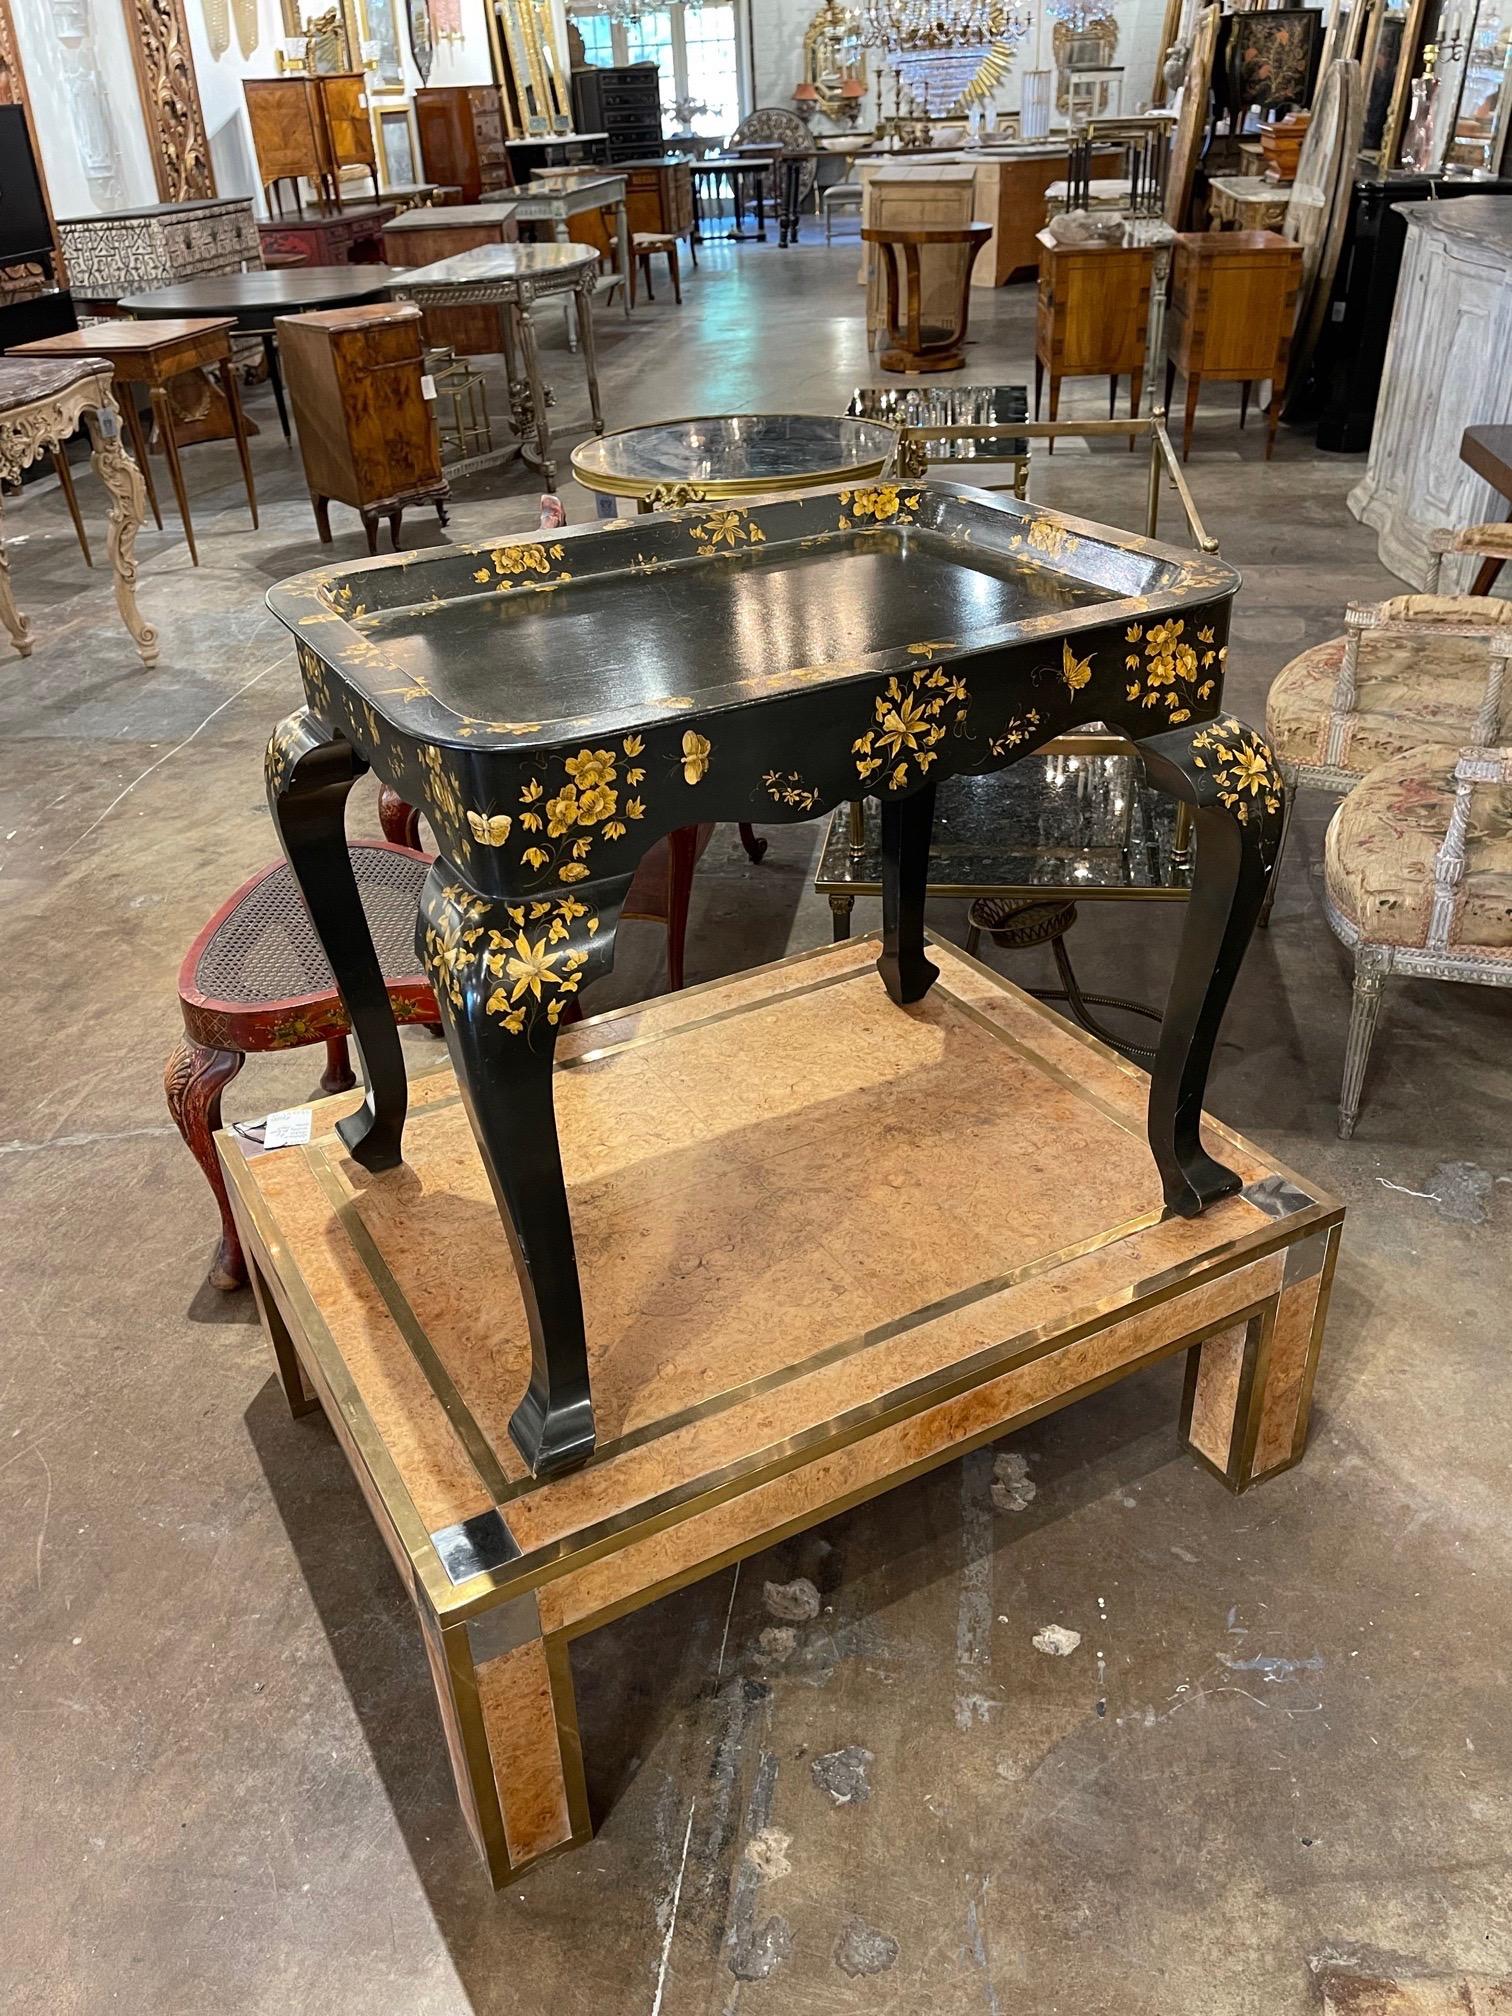 Decorative vintage English black lacquered and Chinoiserie inspired hand painted side table. Really pretty! A fabulous accent piece.